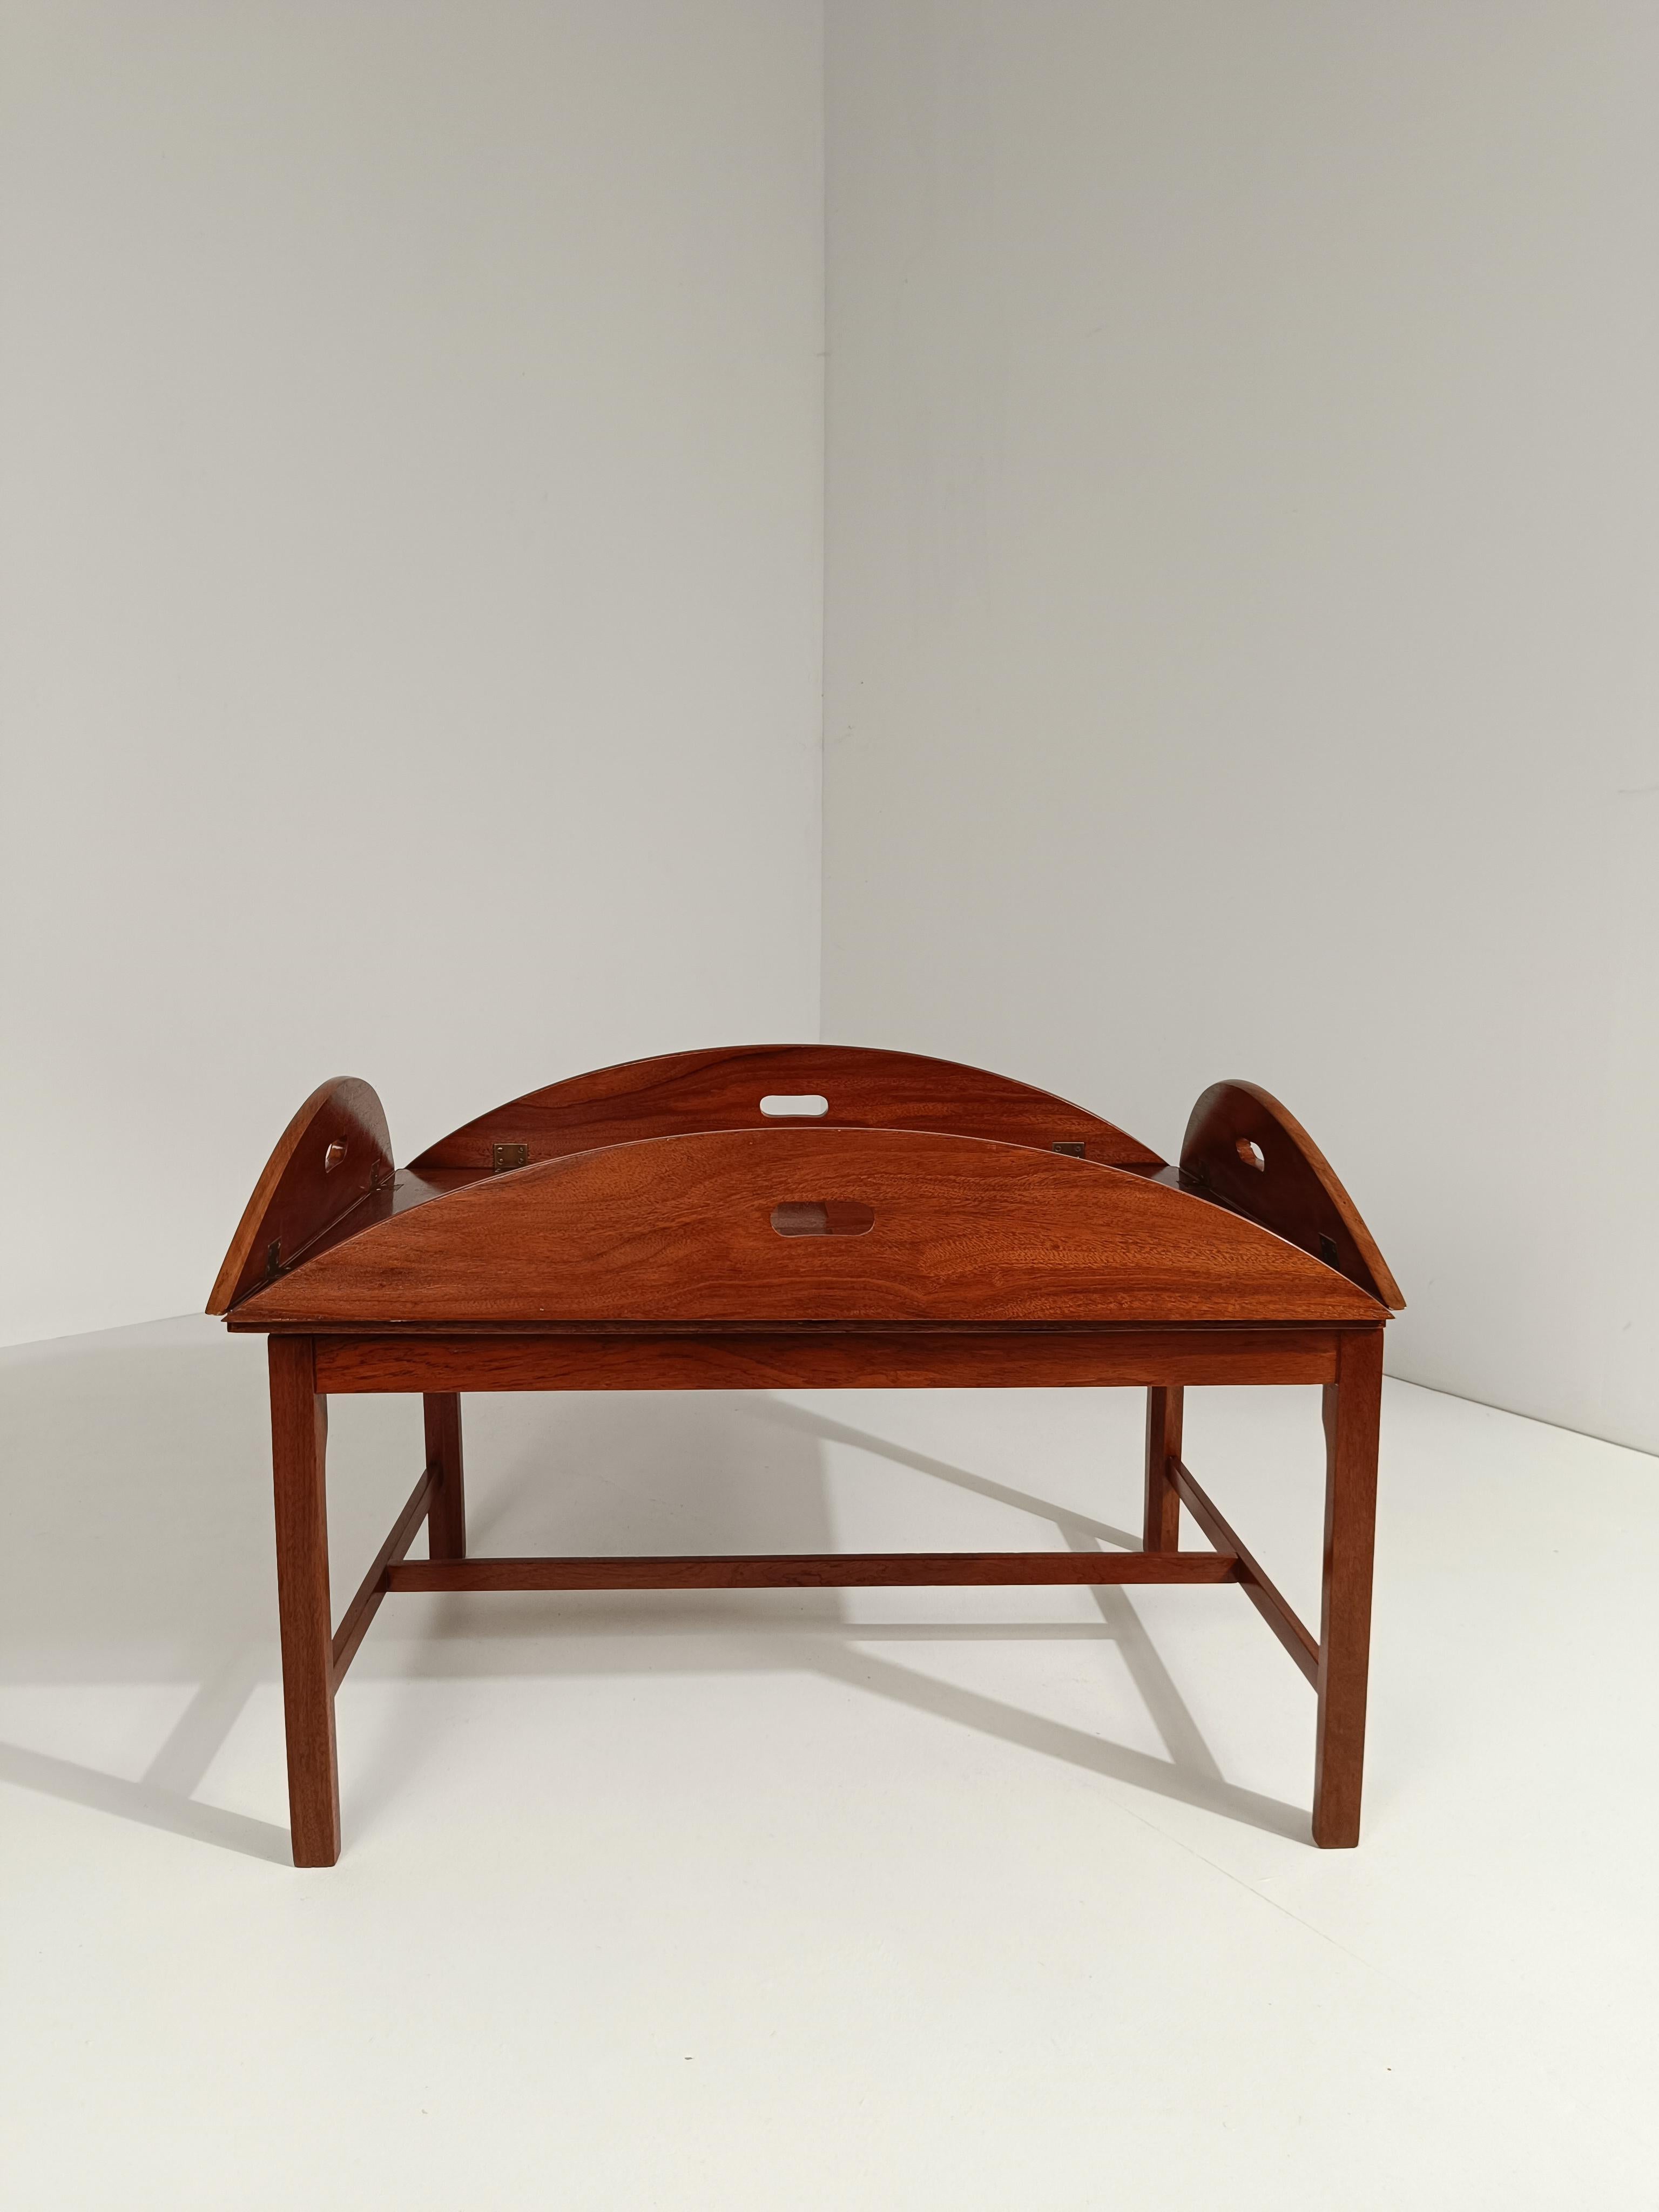 Vintage Oval Mahogany Butler's Coffee Tray Table in Georgian-style, Circa 1960s For Sale 1